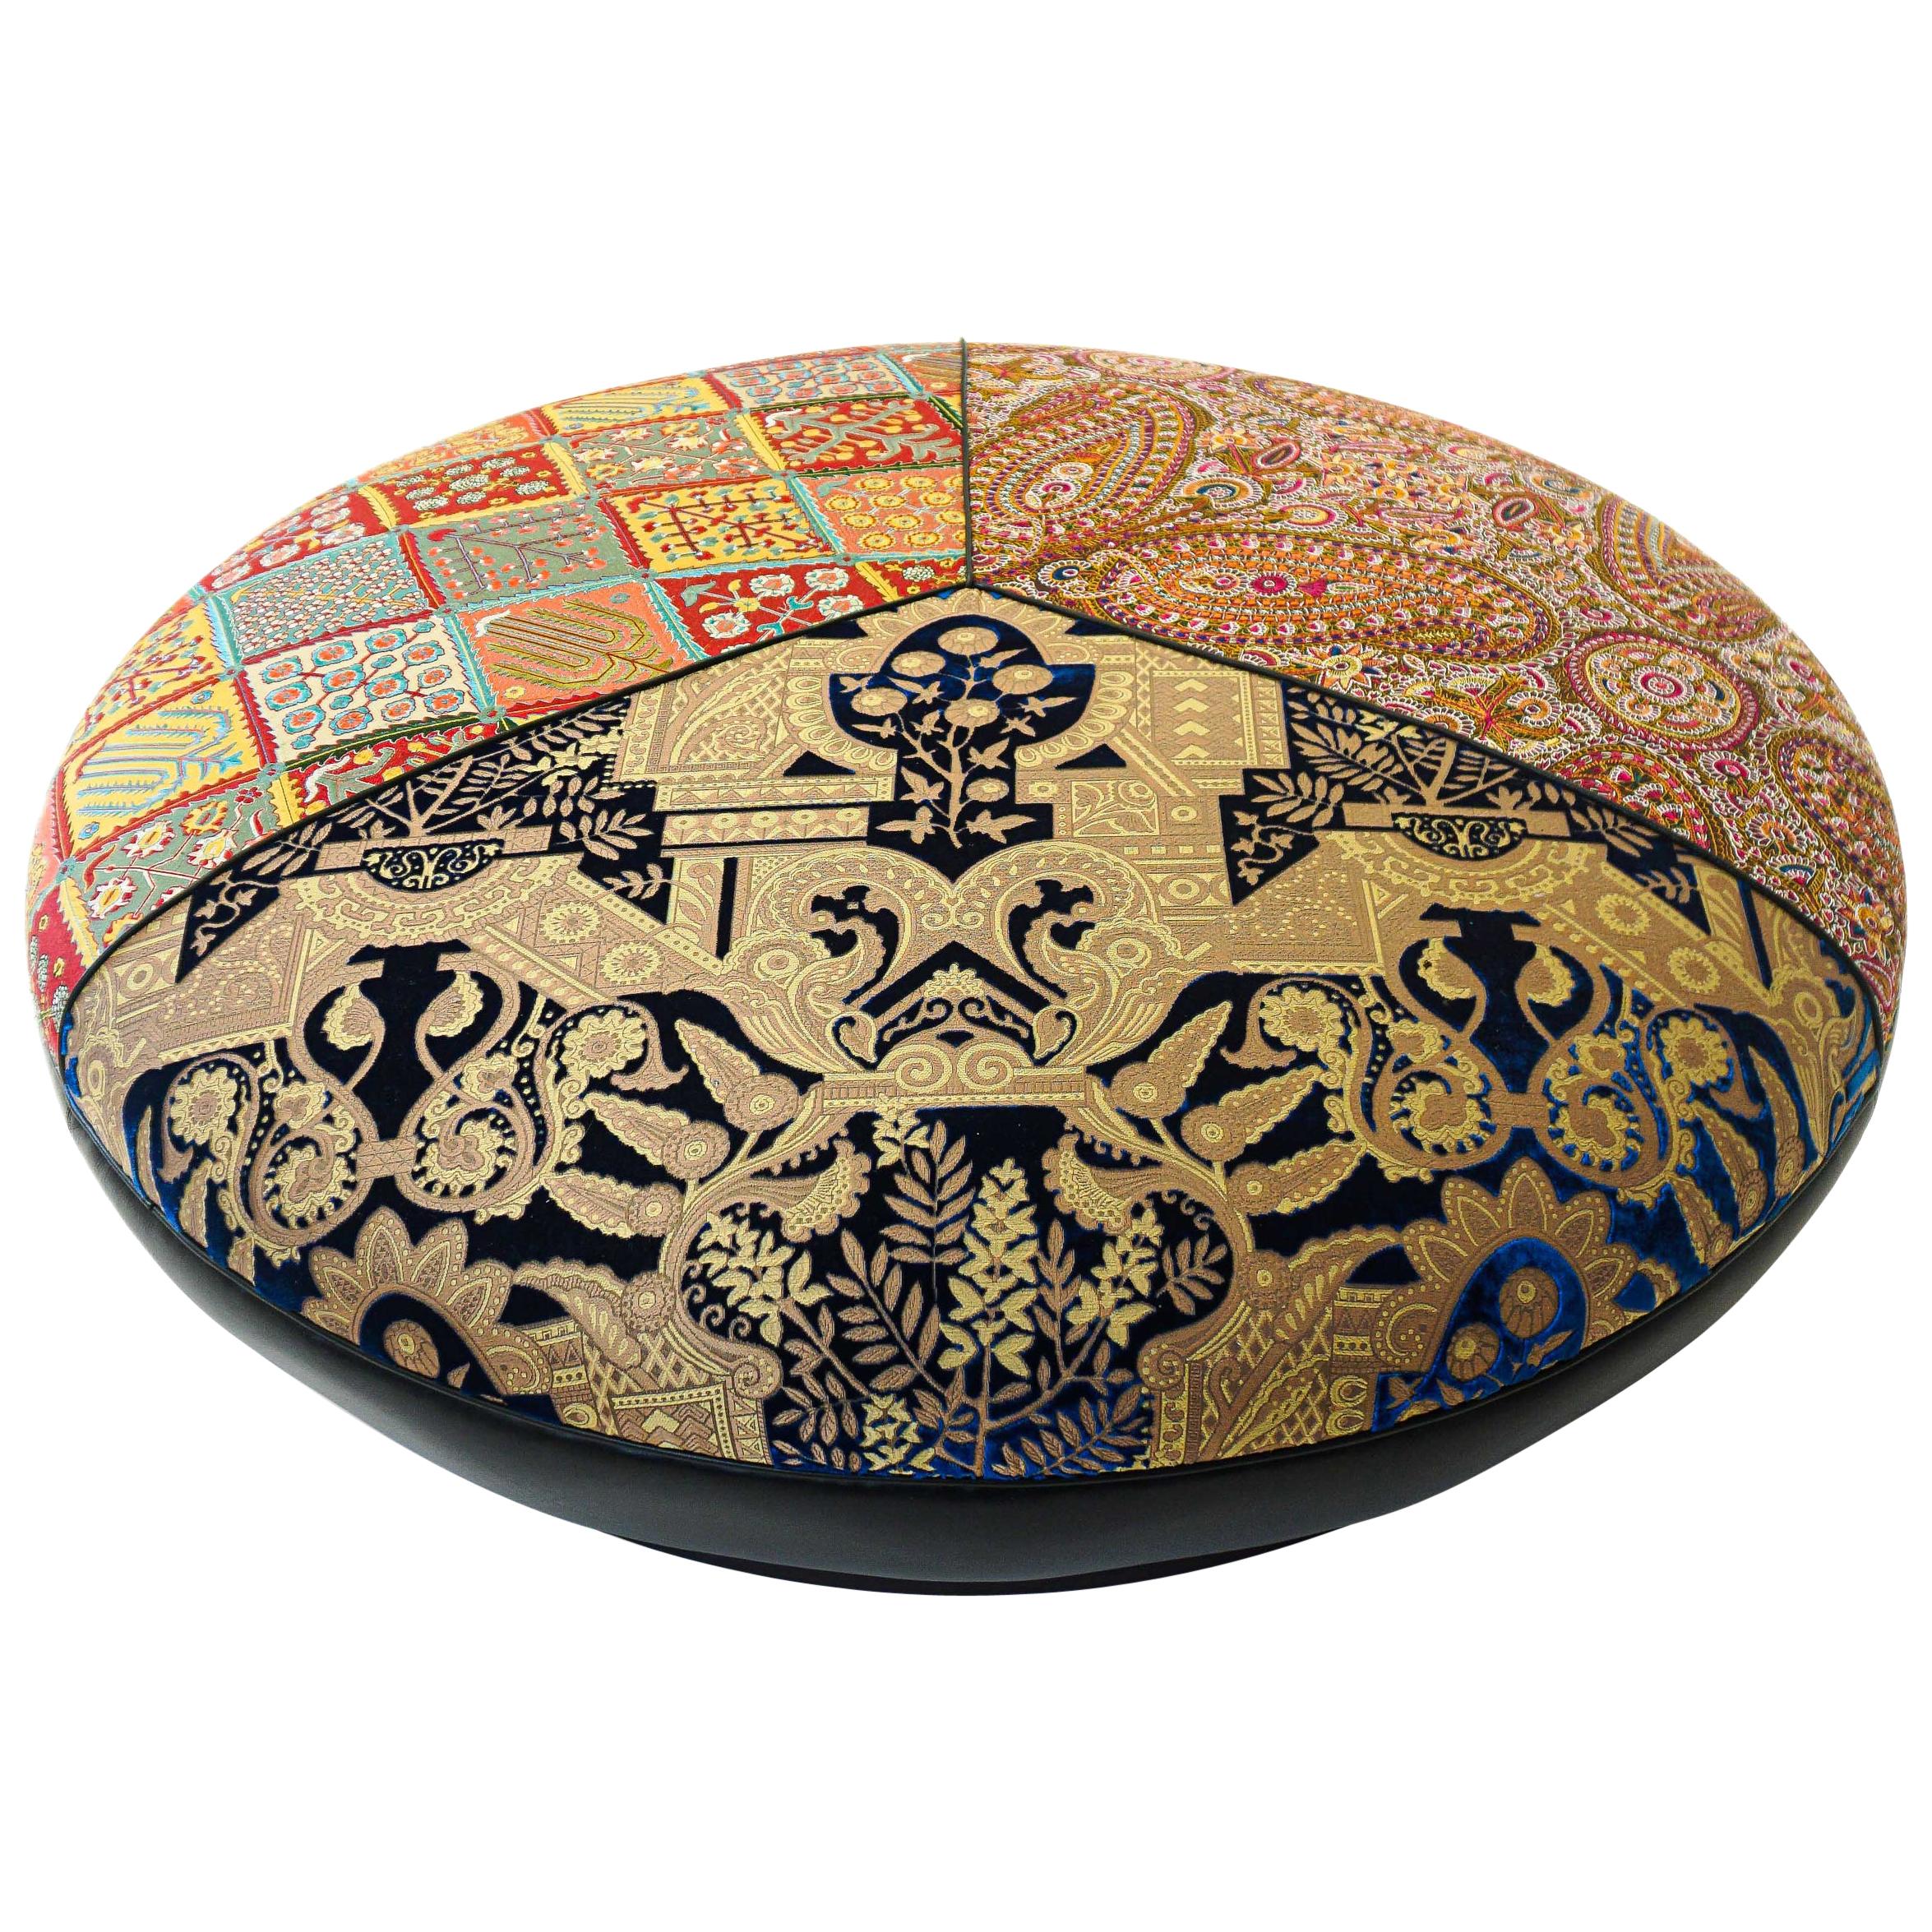 Large Round Upholstered Moroccan-Inspired Ottoman, Customizable